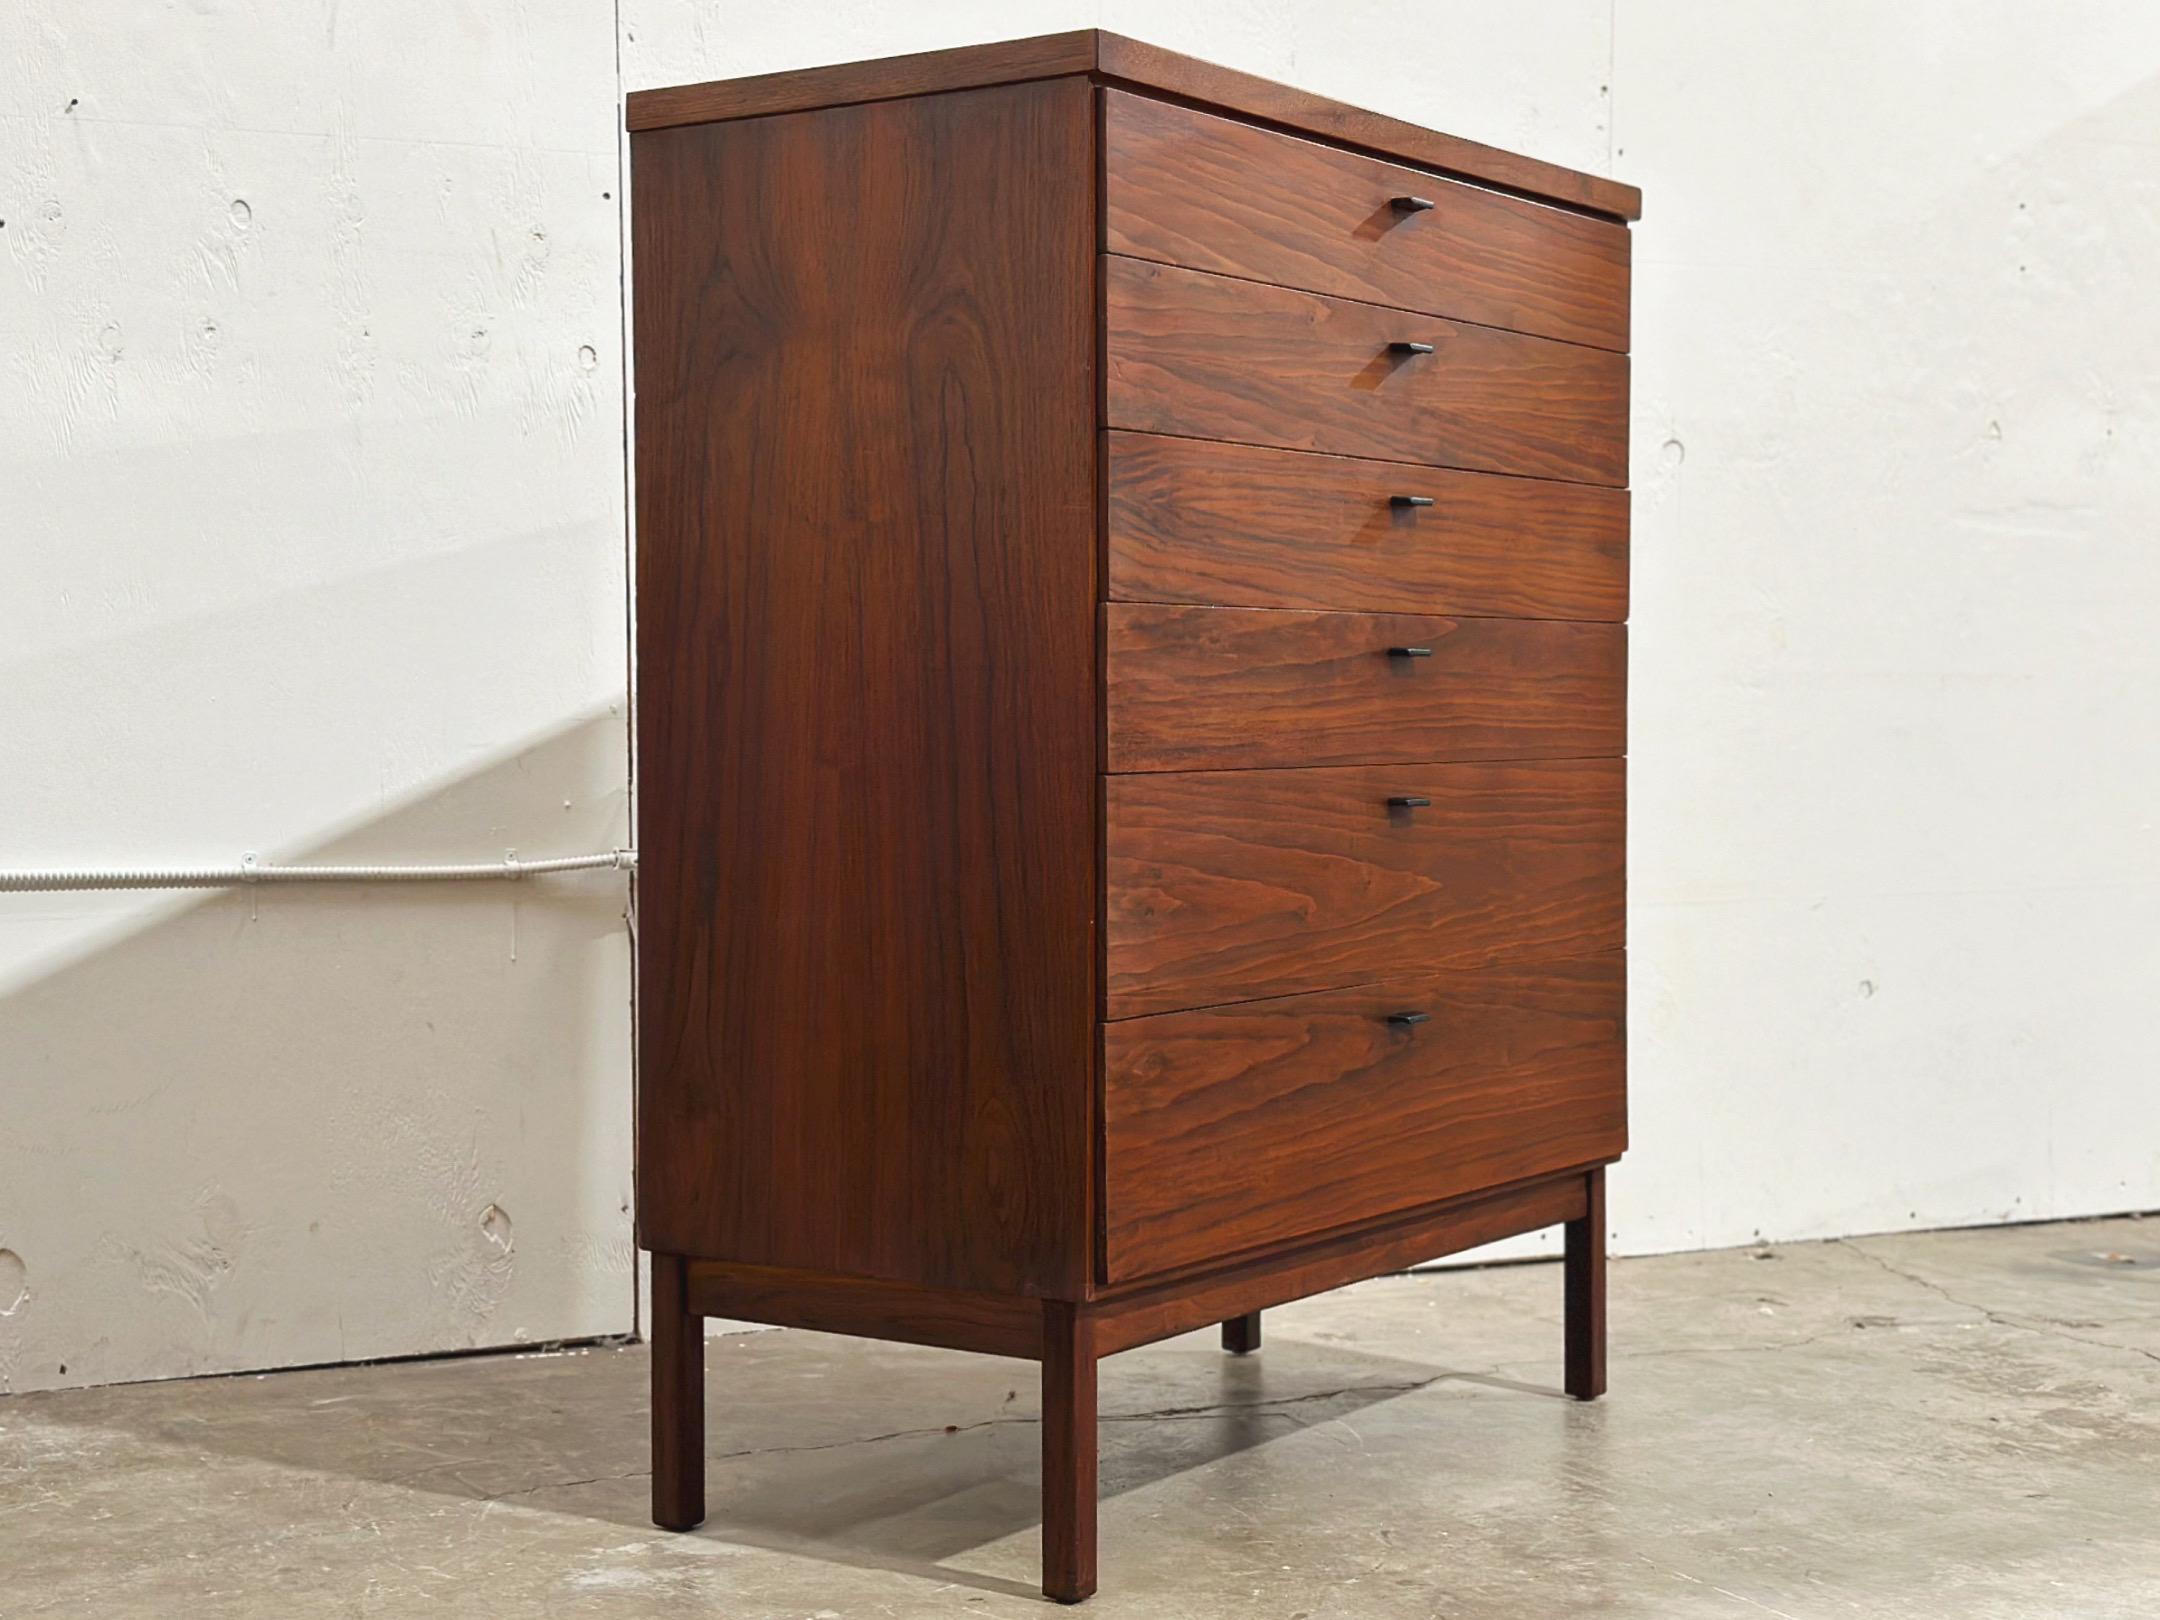 American Midcentury Dresser - Jack Cartwright - Founders Patterns 10 - Tall Highboy Chest For Sale